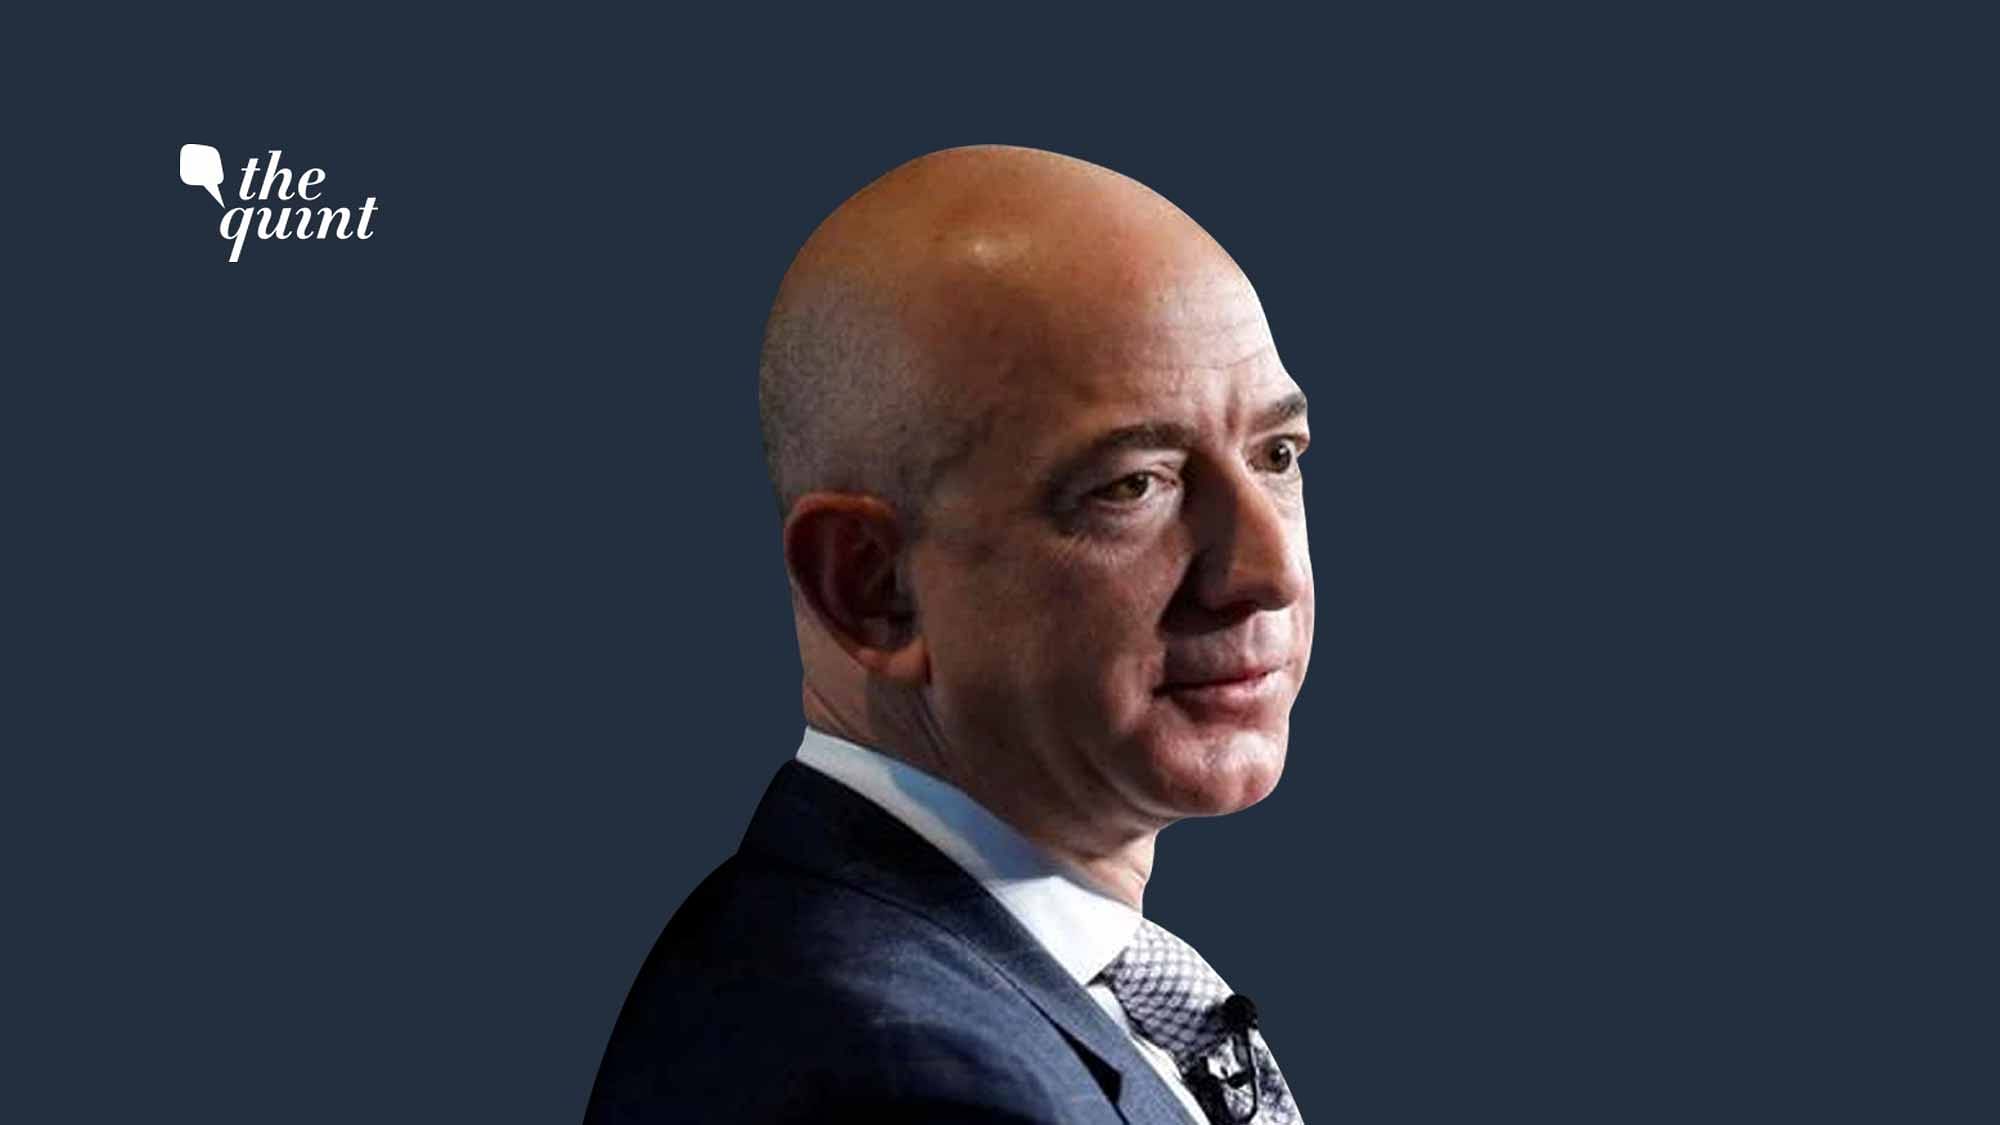 Jeff Bezos, Amazon founder, was the target of a phone hack that allegedly involved Saudi Arabian Crown Prince Mohammed bin Salman.